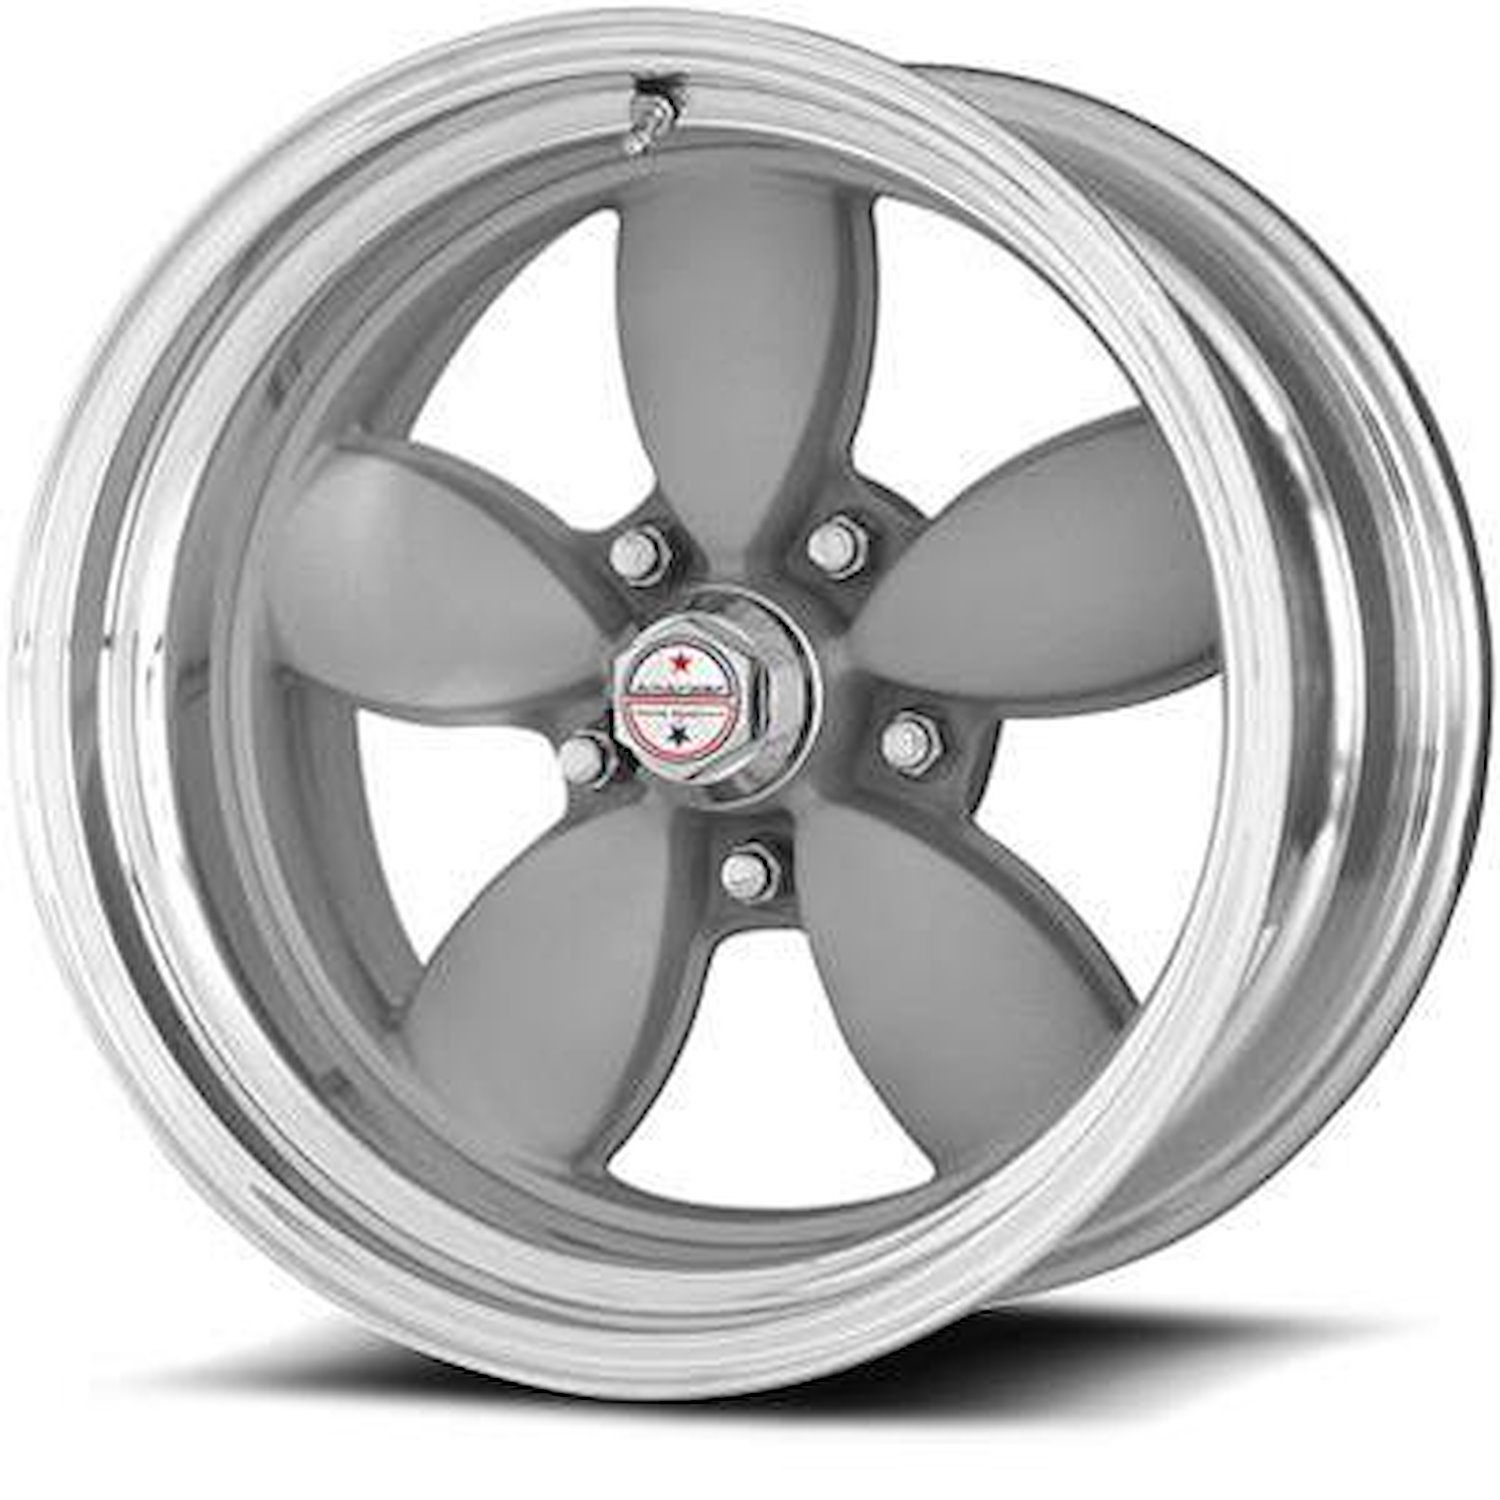 AMERICAN RACING CLASSIC 200S TWO-PIECE MAG GRAY CENTER POLISHED BARREL 17 x 9.5 5x4.5 32 6.51